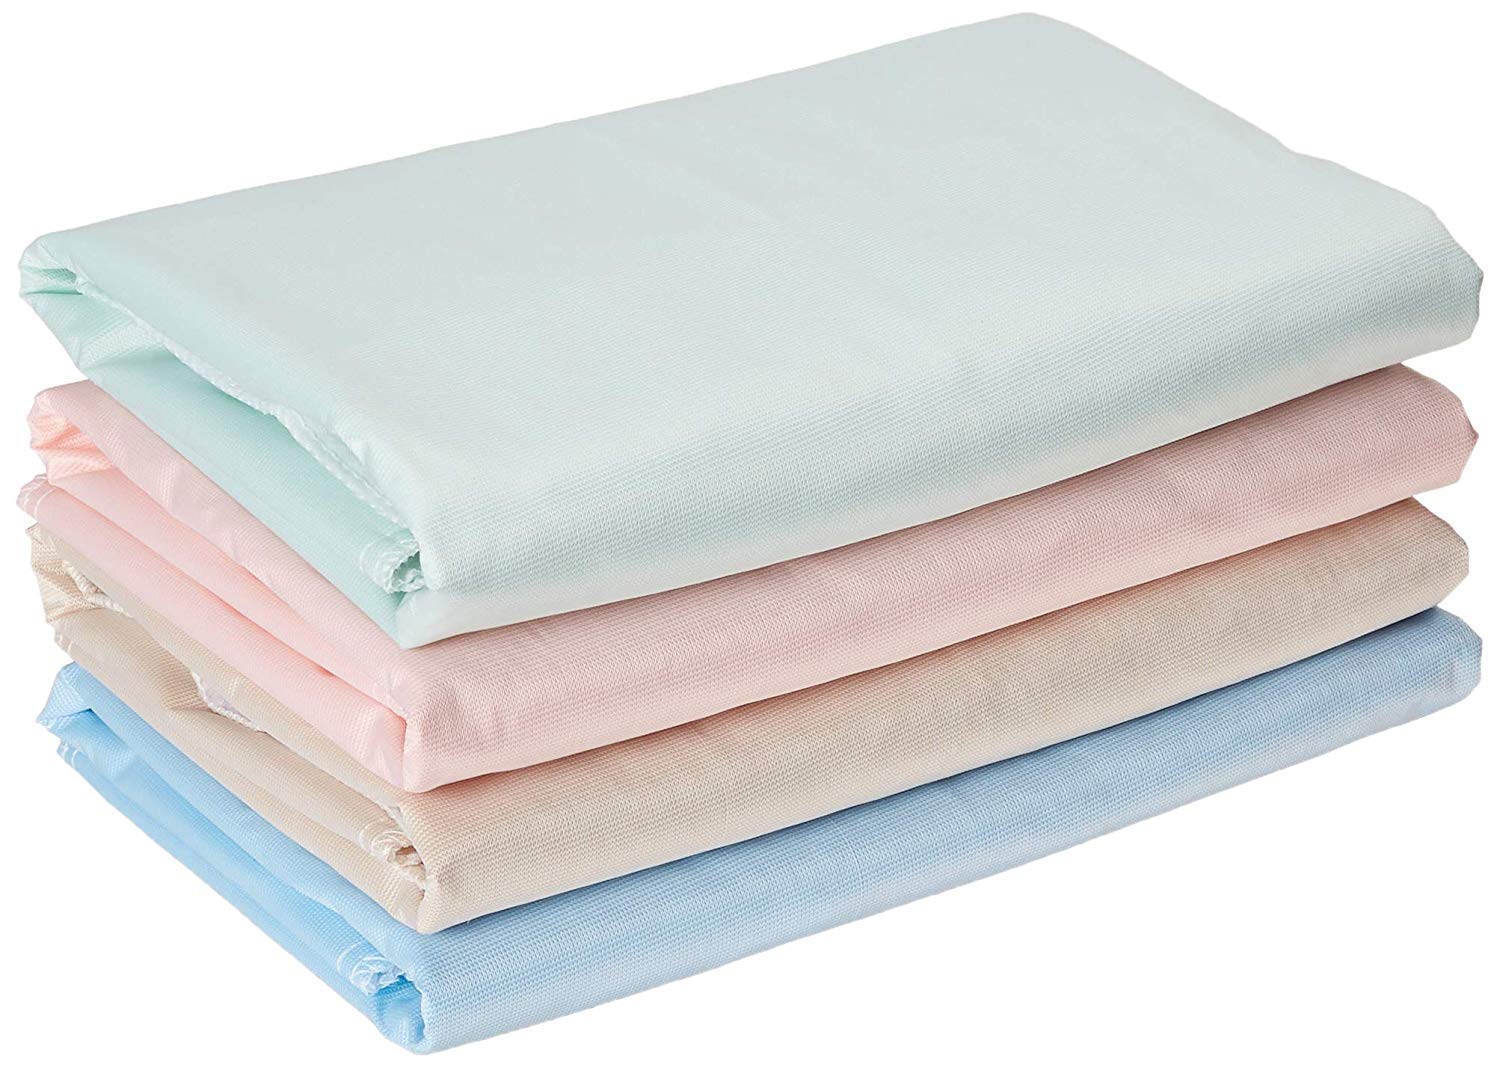 Choosing the Best Incontinence Bed Pads